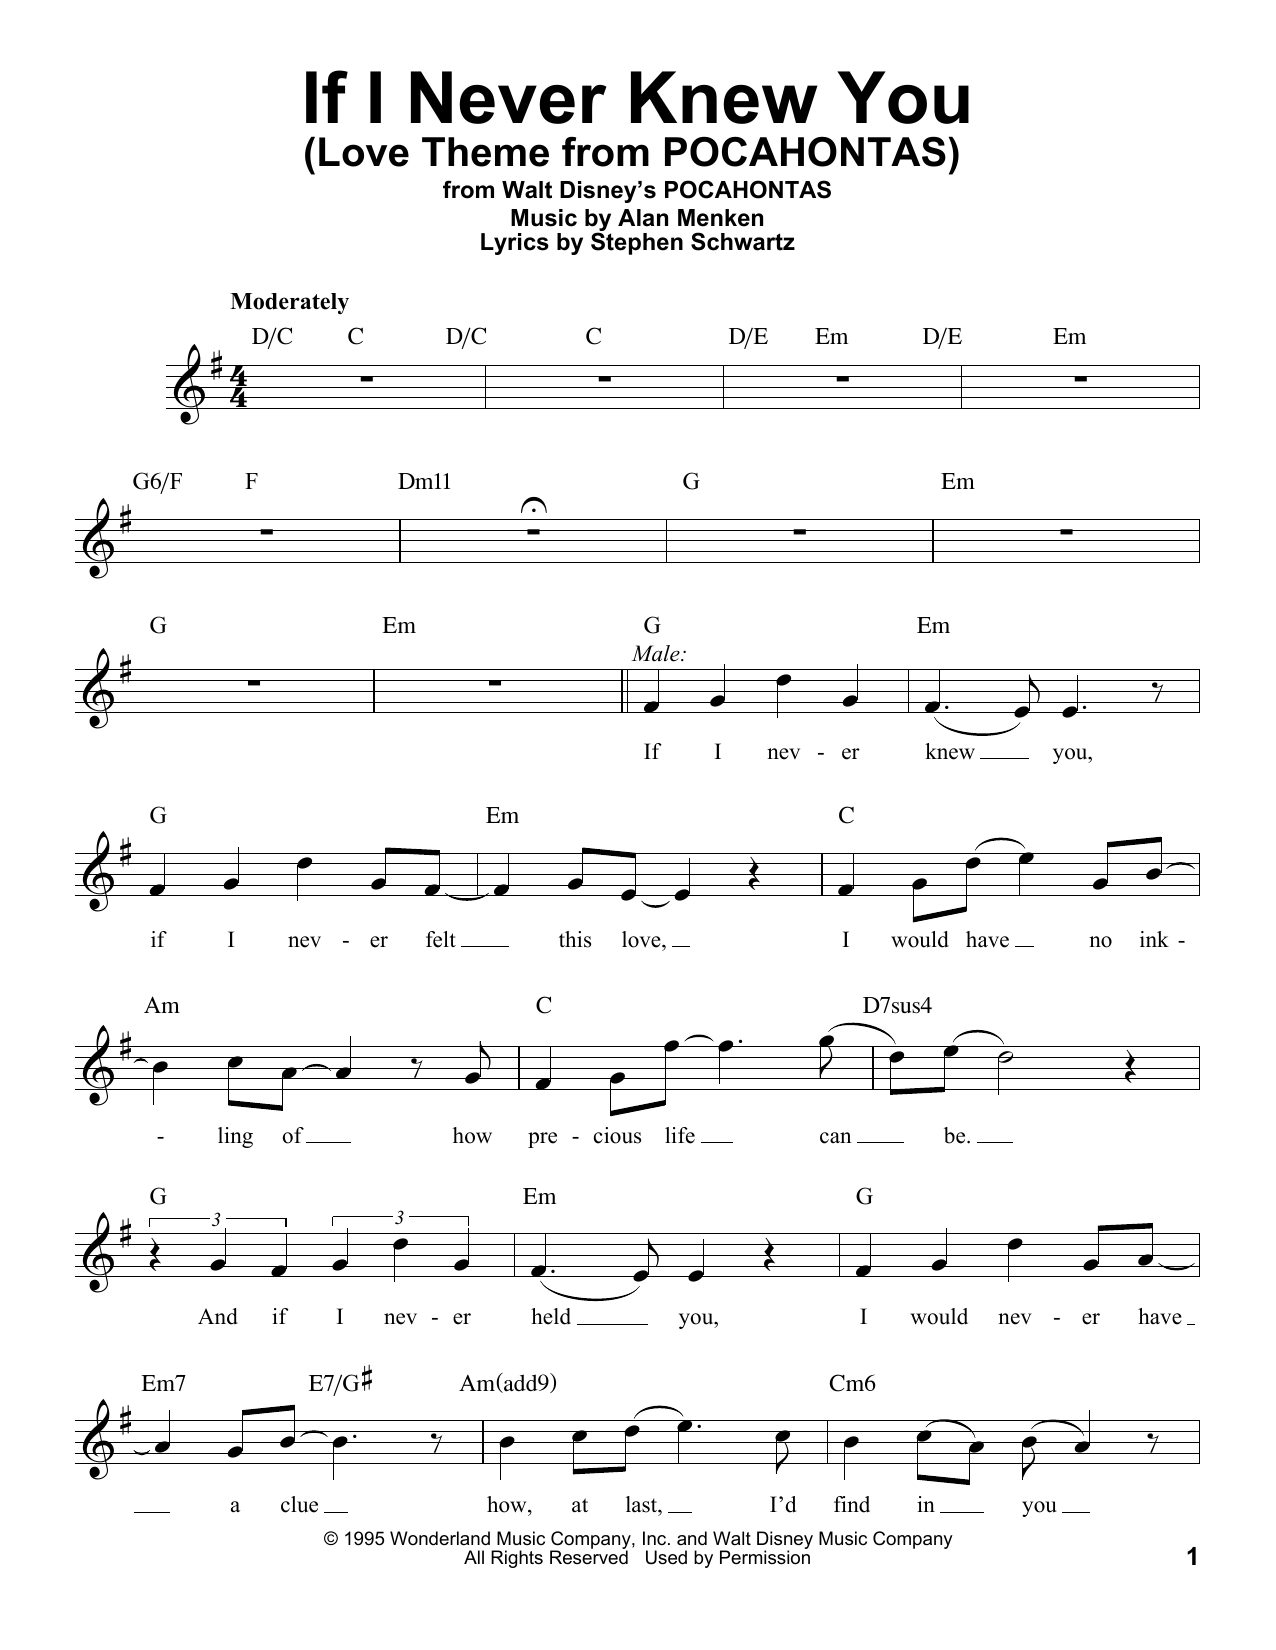 Download Jon Secada and Shanice If I Never Knew You (End Title) Sheet Music